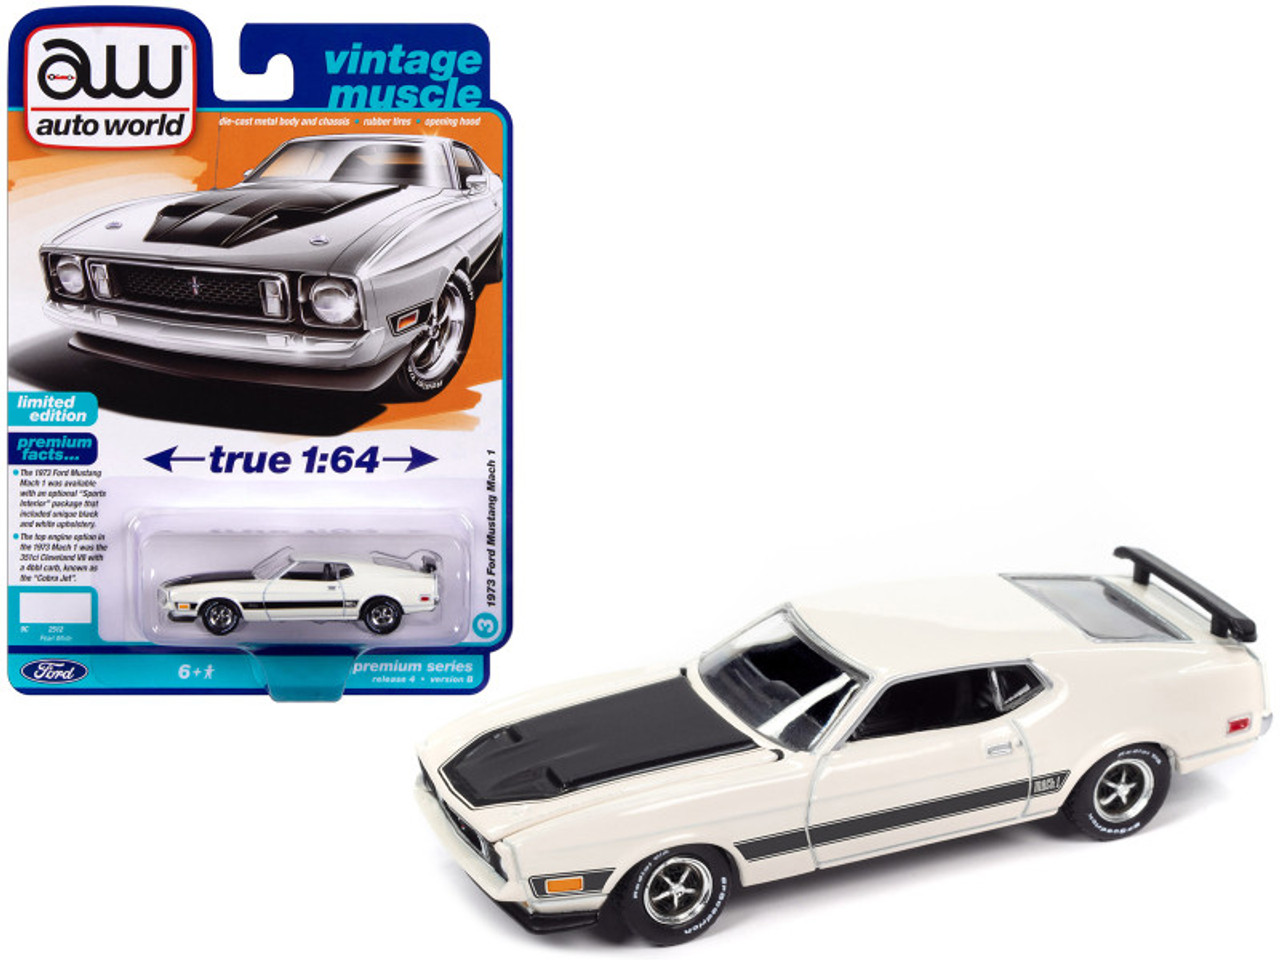 1973 Ford Mustang Mach 1 Pearl White with Black Hood and Stripes "Vintage Muscle" Limited Edition 1/64 Diecast Model Car by Auto World